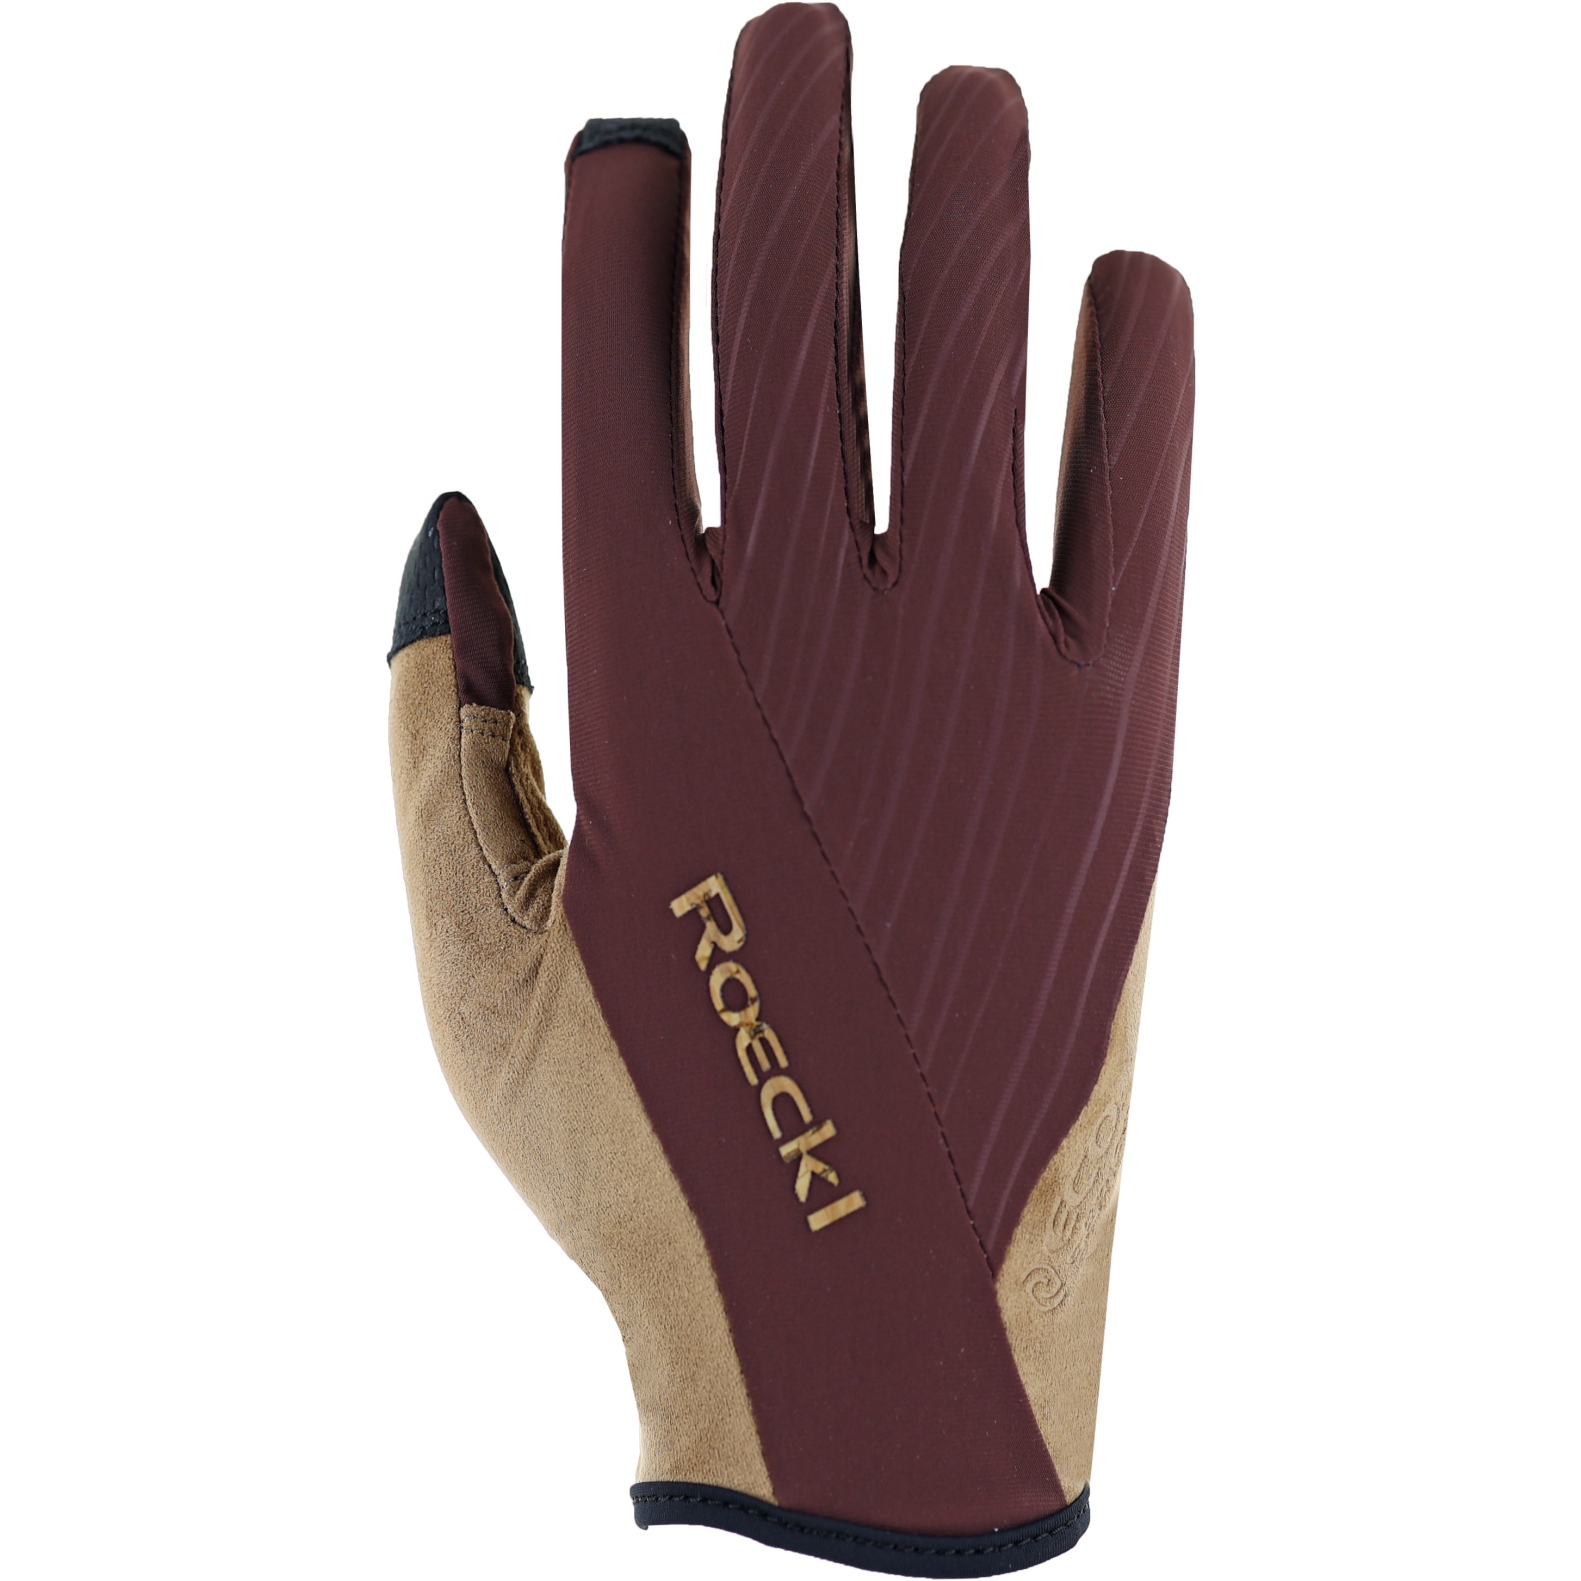 Picture of Roeckl Sports Malvedo Cycling Gloves - mahogany 7700